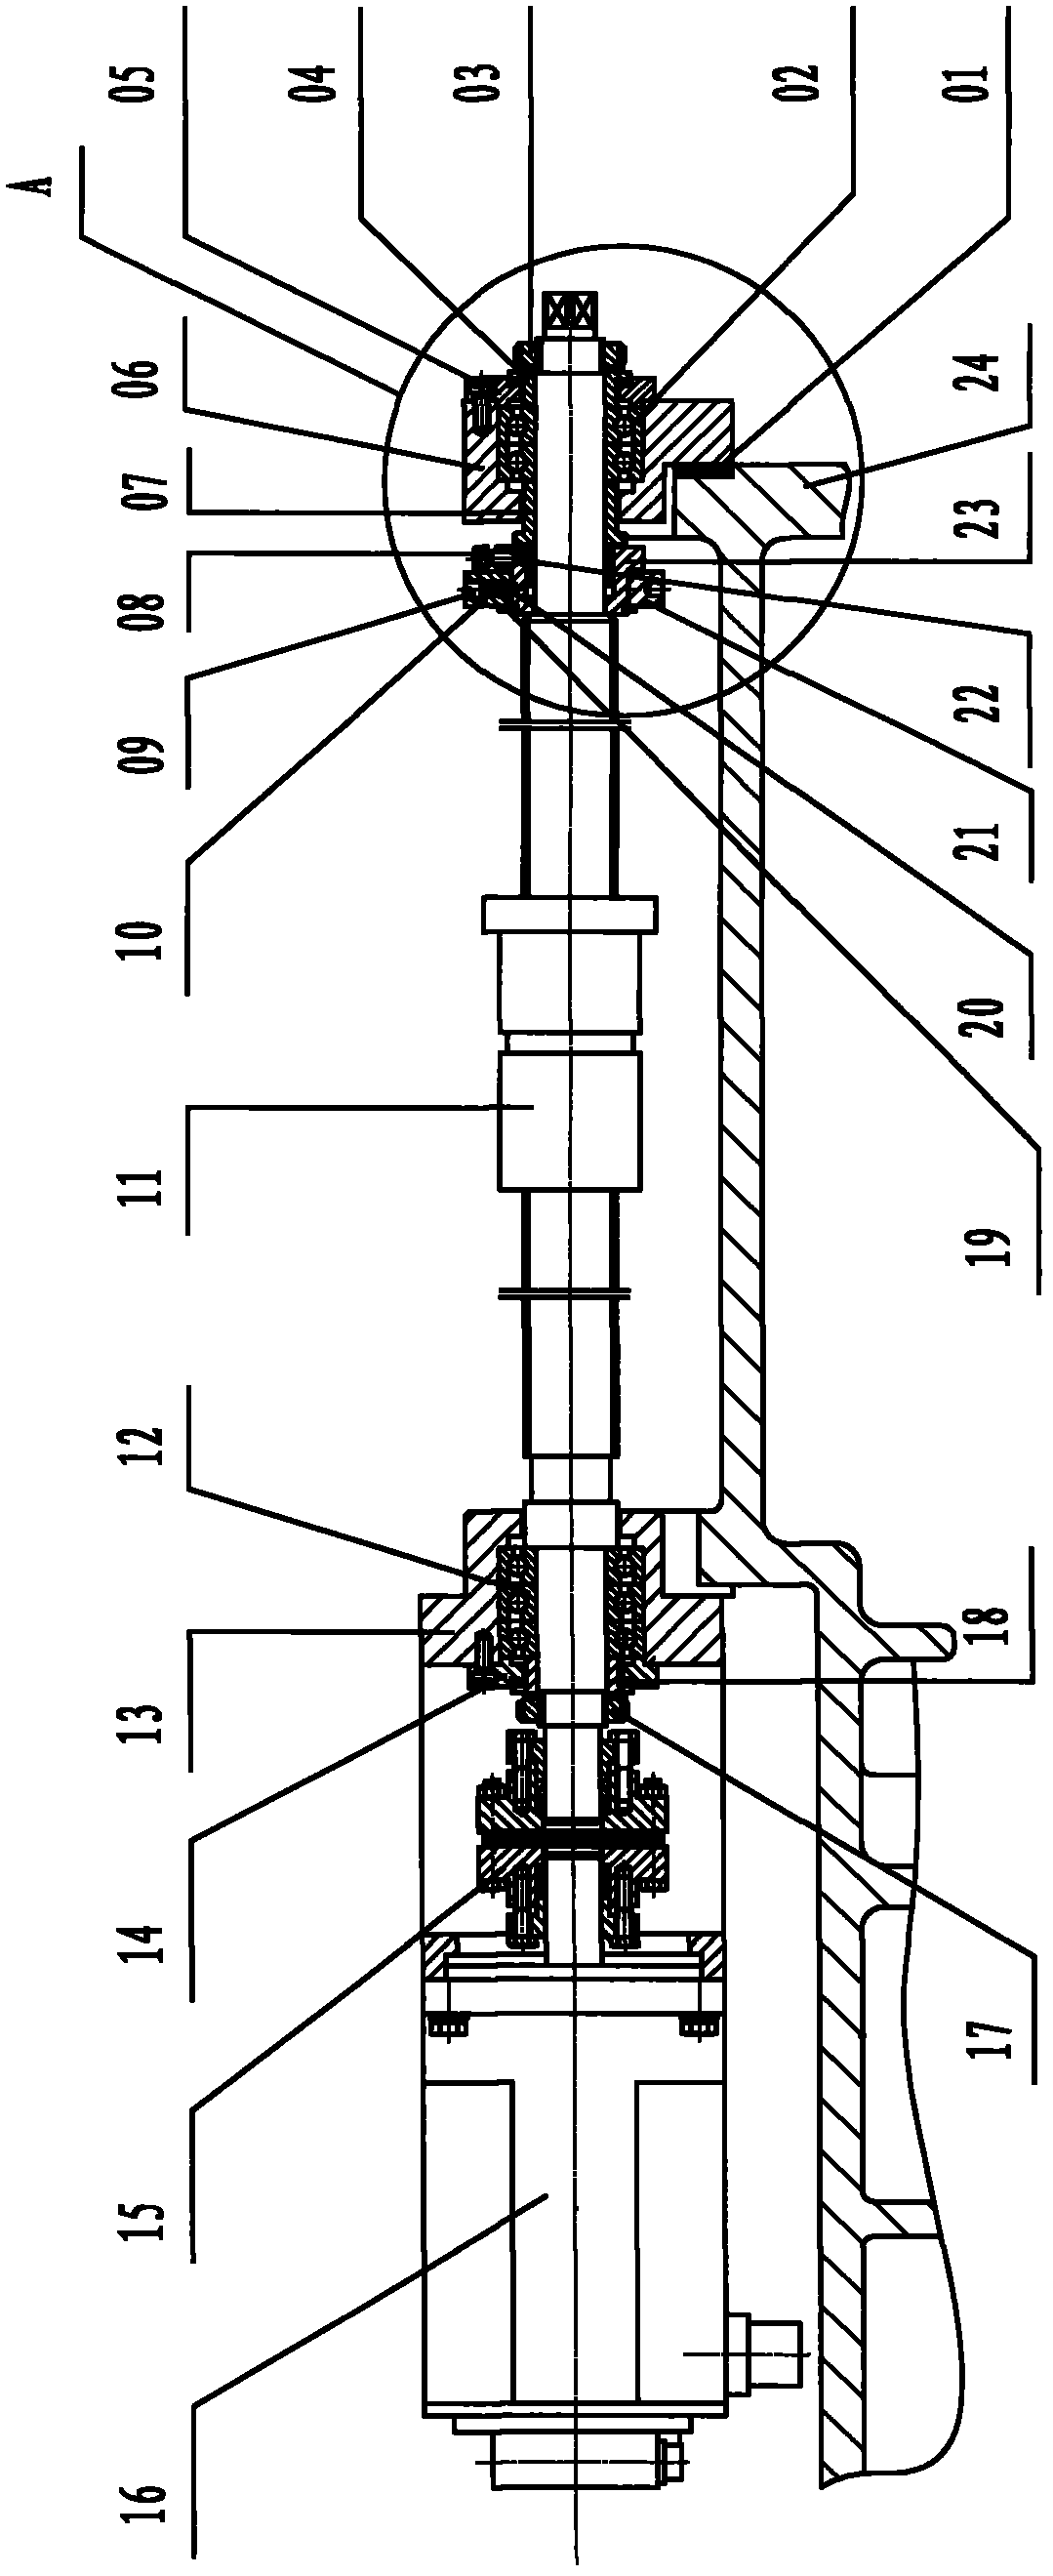 Structural support of ball screw assembly